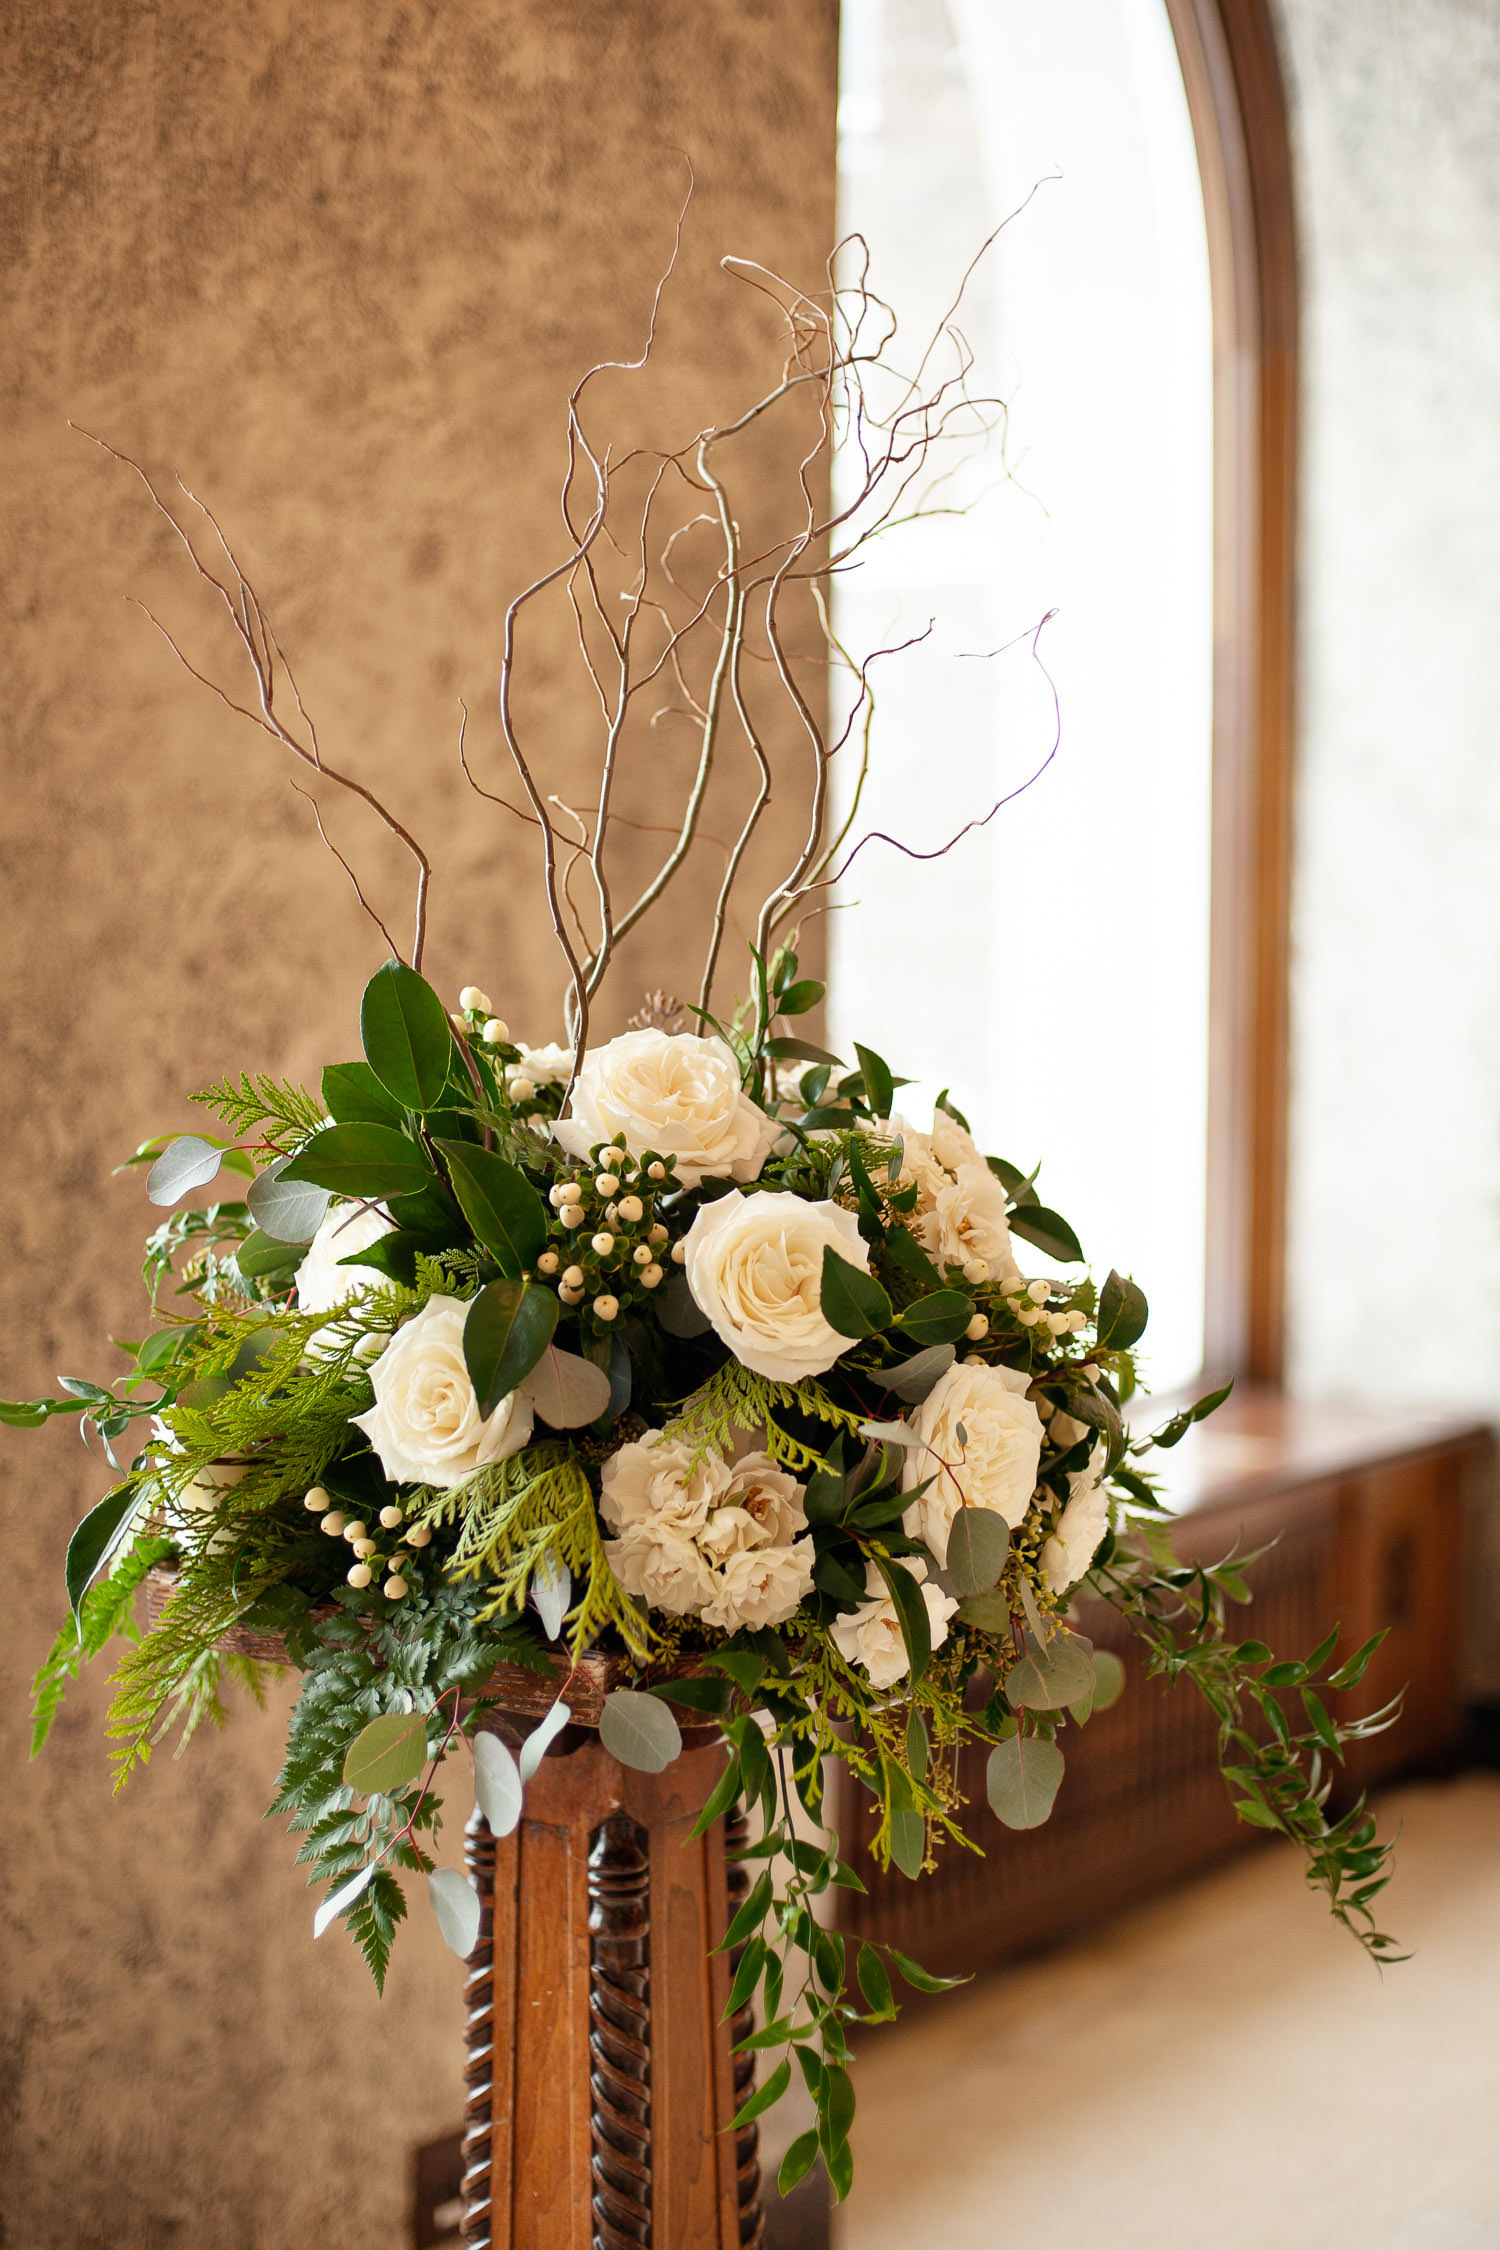 Ceremony florals in the Riverview Lounge at the Fairmont Banff Springs captured by Tara Whittaker Photography